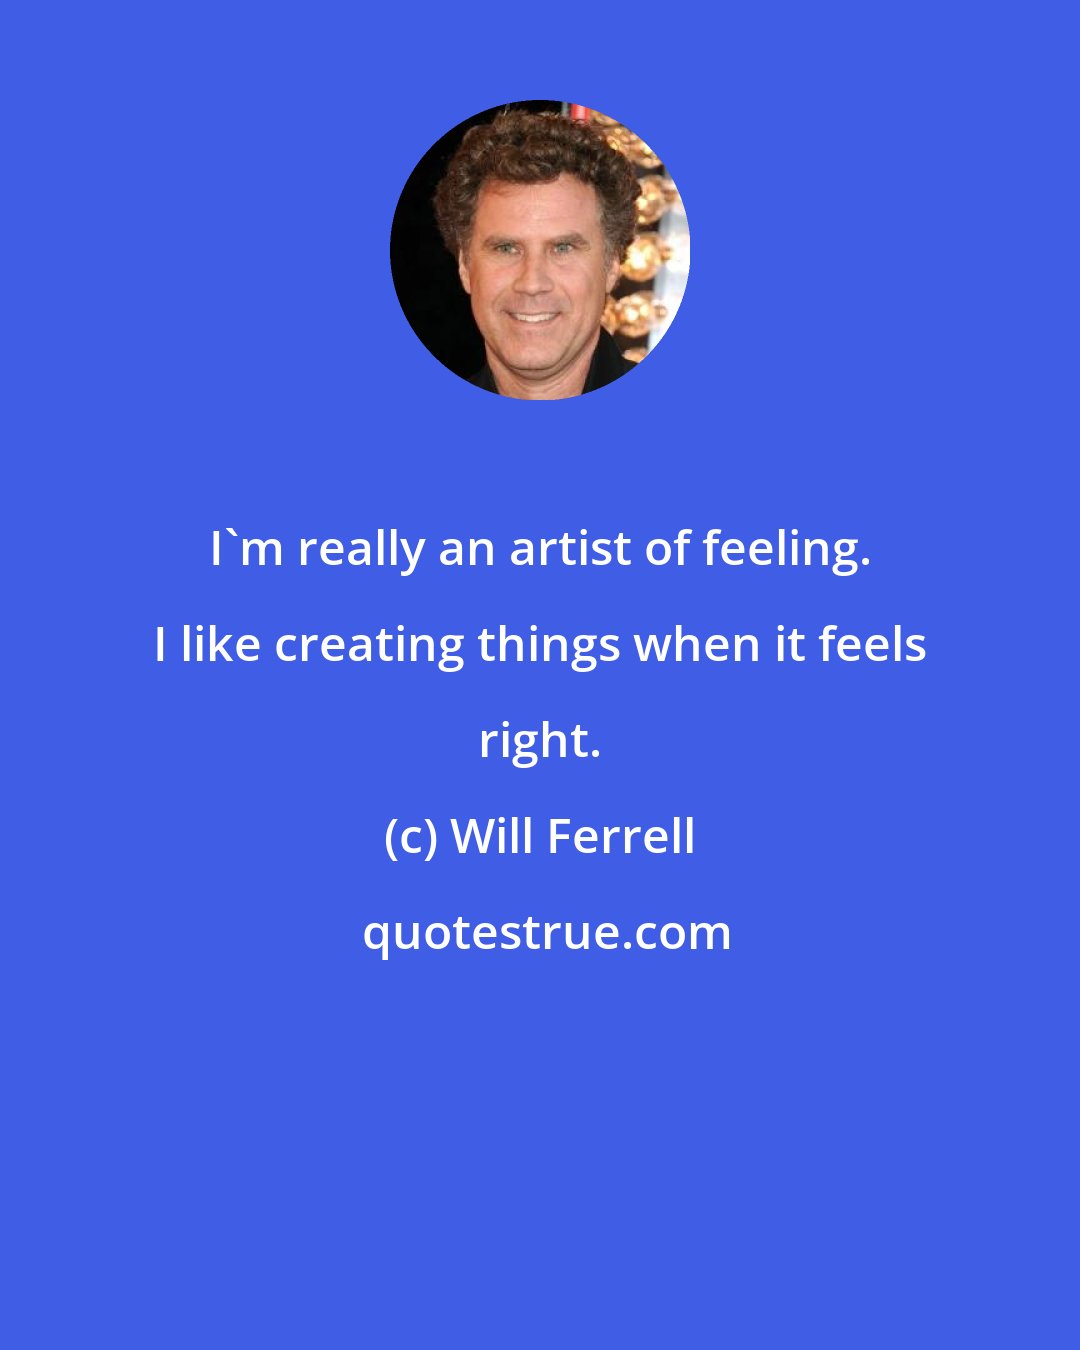 Will Ferrell: I'm really an artist of feeling. I like creating things when it feels right.